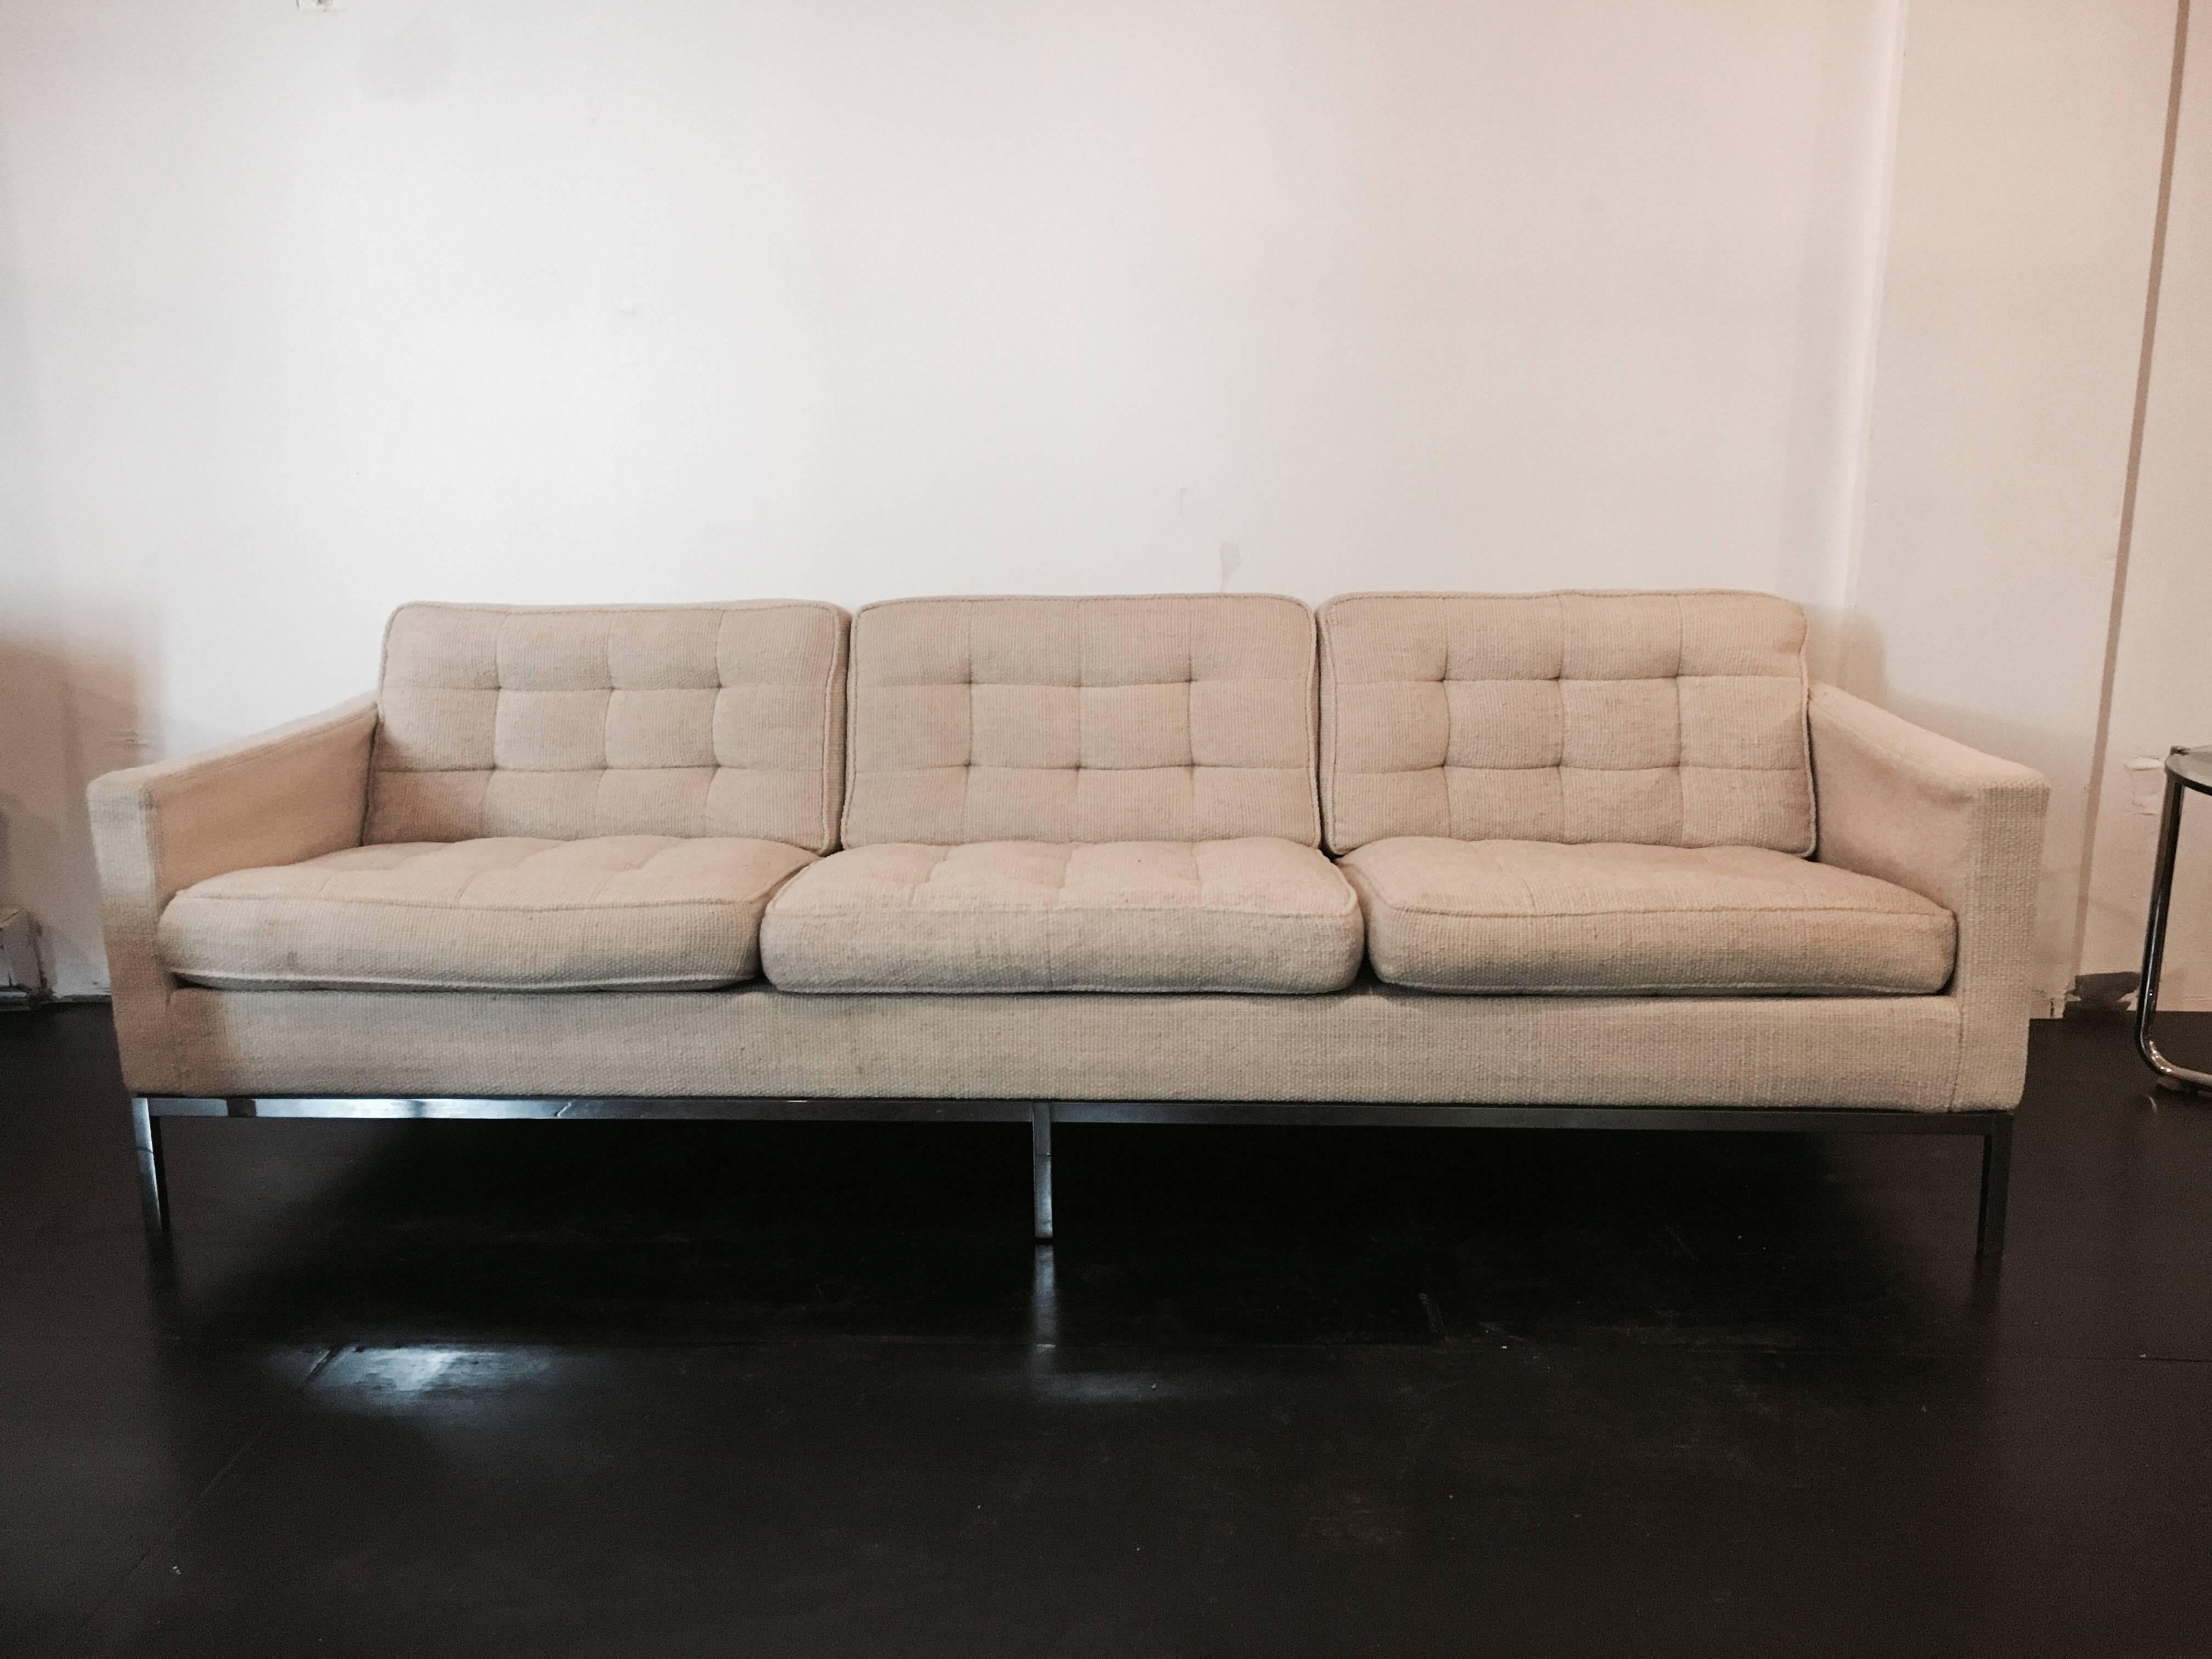 Three-seat sofa designed by Florence Knoll for Knoll Associates, circa 1955. Tubular Steel frame, upholstered in a woven wool Knoll textile.